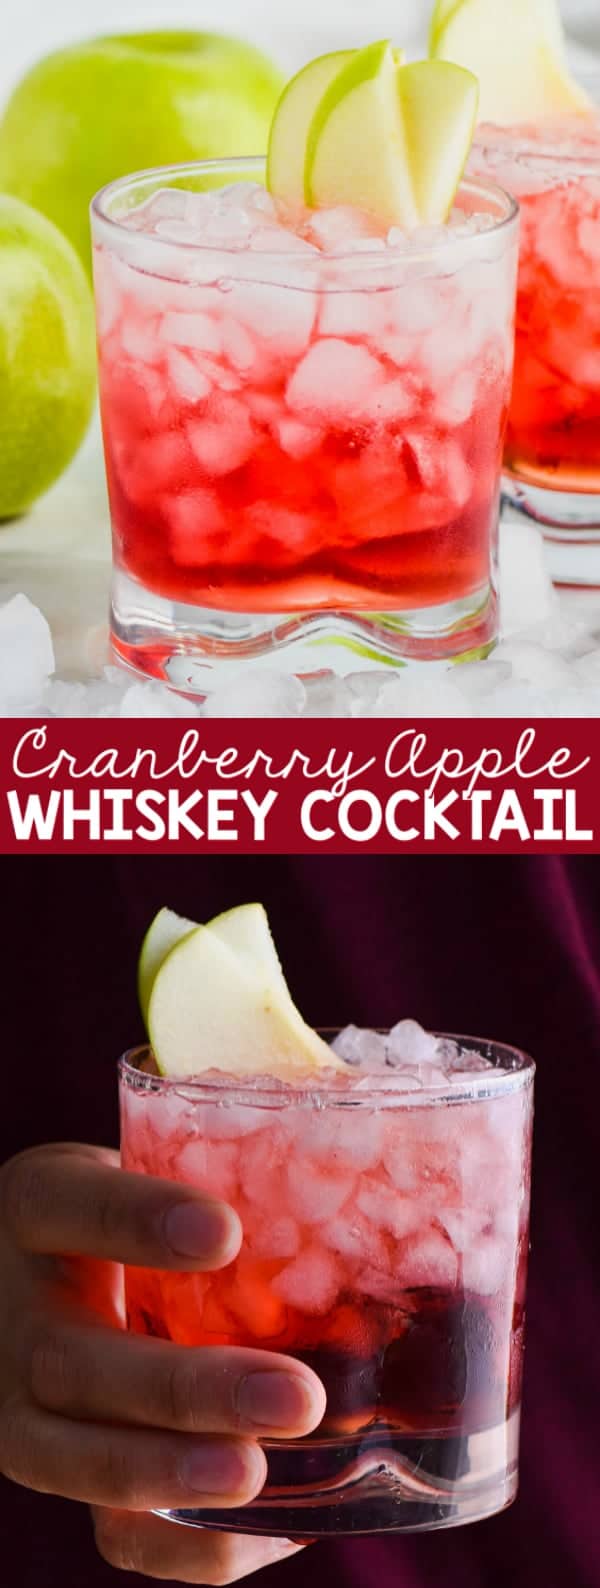 cranberry apple whiskey cocktail garnished with apple